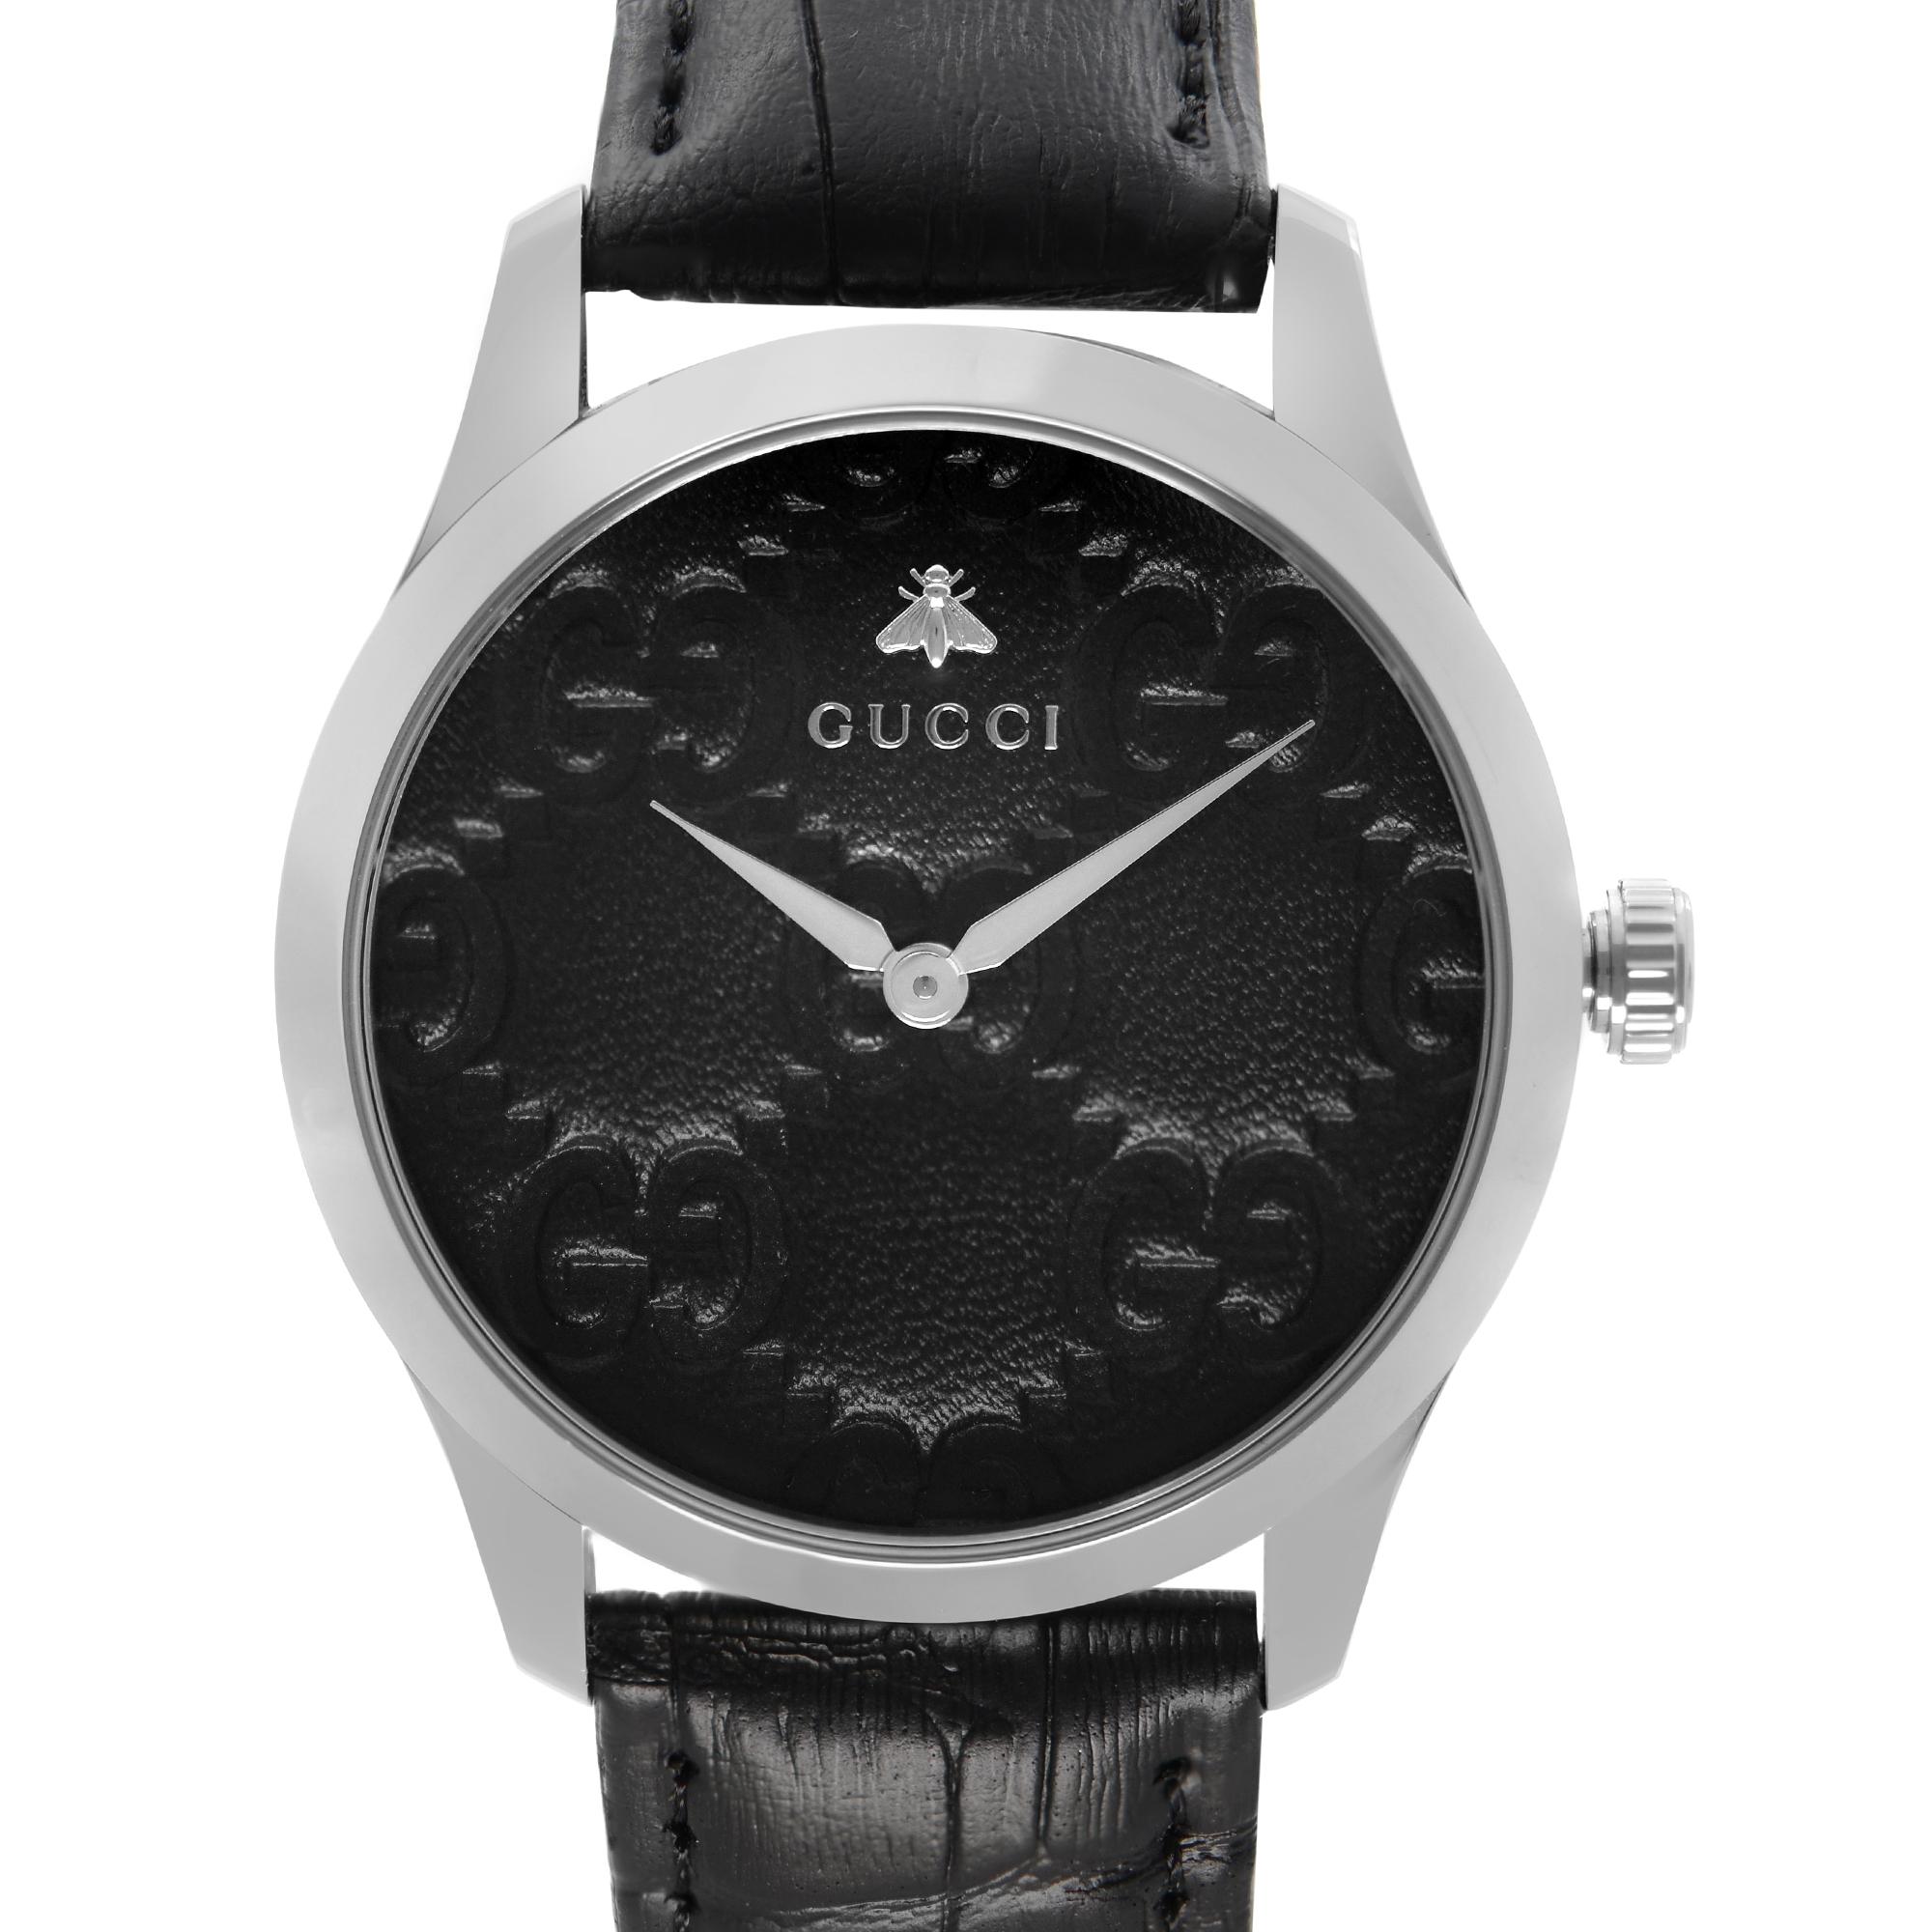 Pre-owned Gucci G Timeless 38mm Stainless Steel Black Dial Quartz Men's Watch YA1264031. Aftermarket Leather Band But Gucci Buckle. The Timepiece is powered by a Quartz movement. Features: Polished Stainless Steel Case and Two-Piece Leather Strap.